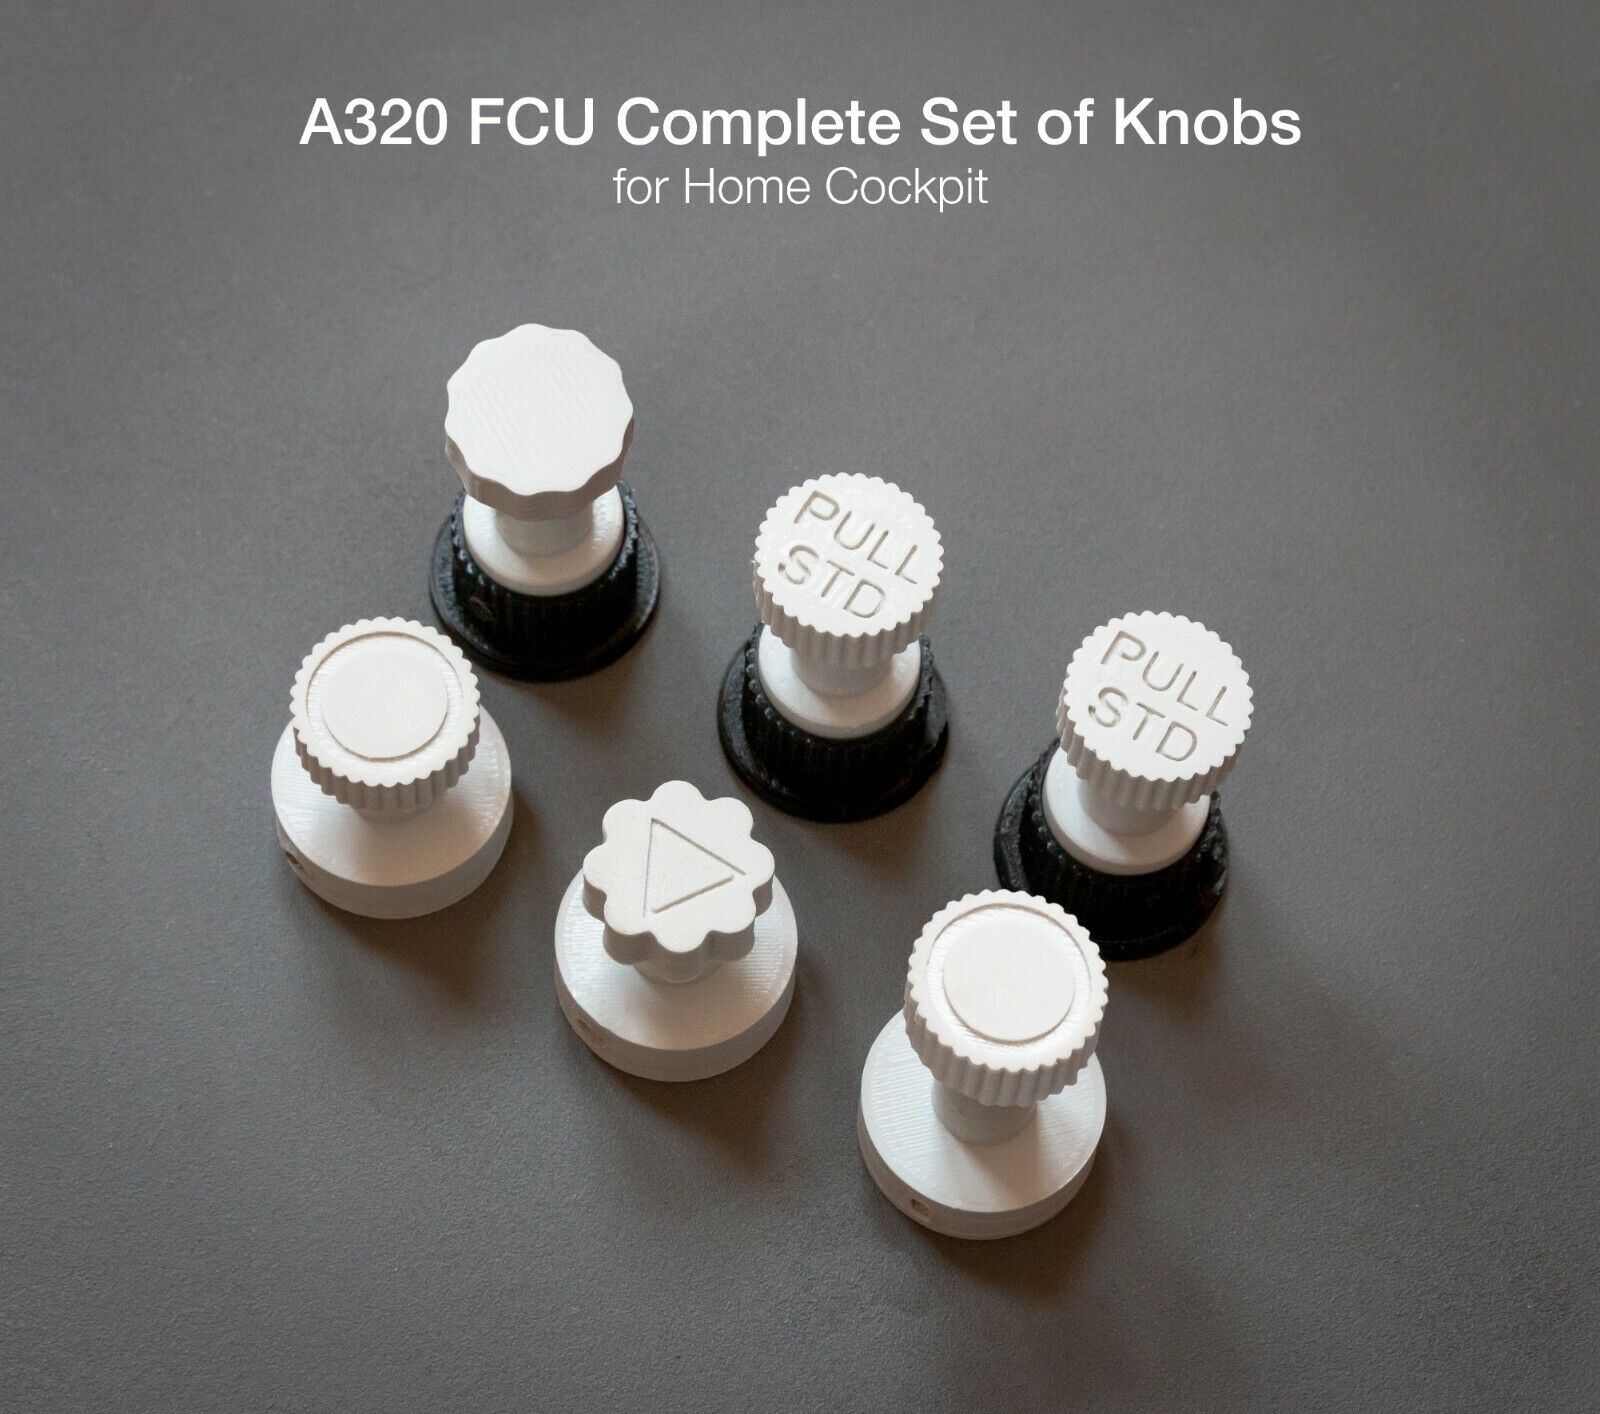 AIRBUS A320 - A330 - A340 - A380 FCU Full Set of Knobs (Grey) for Homecockpit